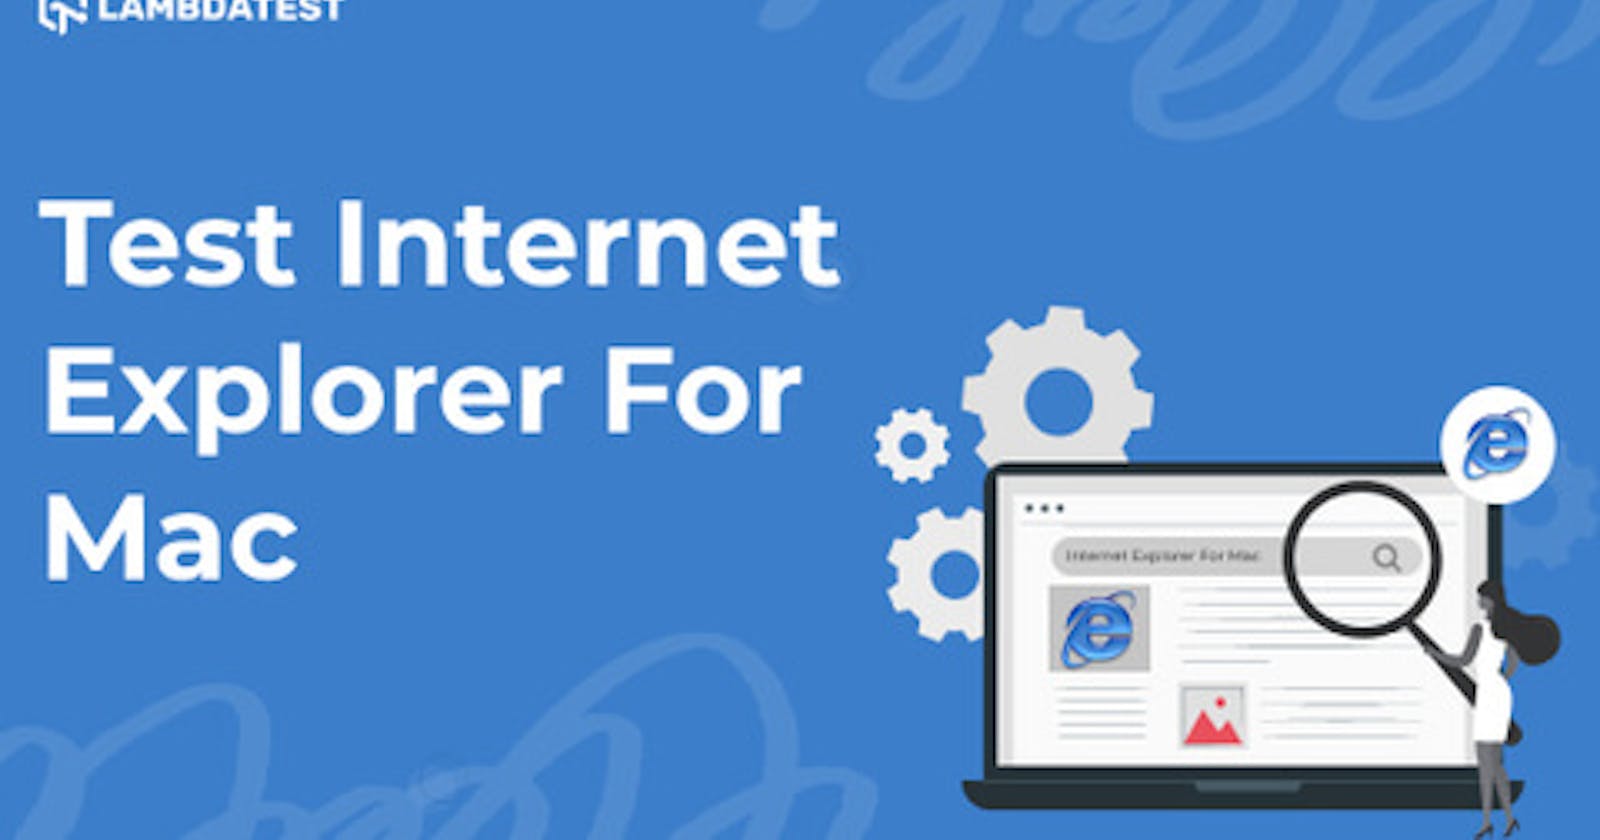 How To Test Internet Explorer For Mac